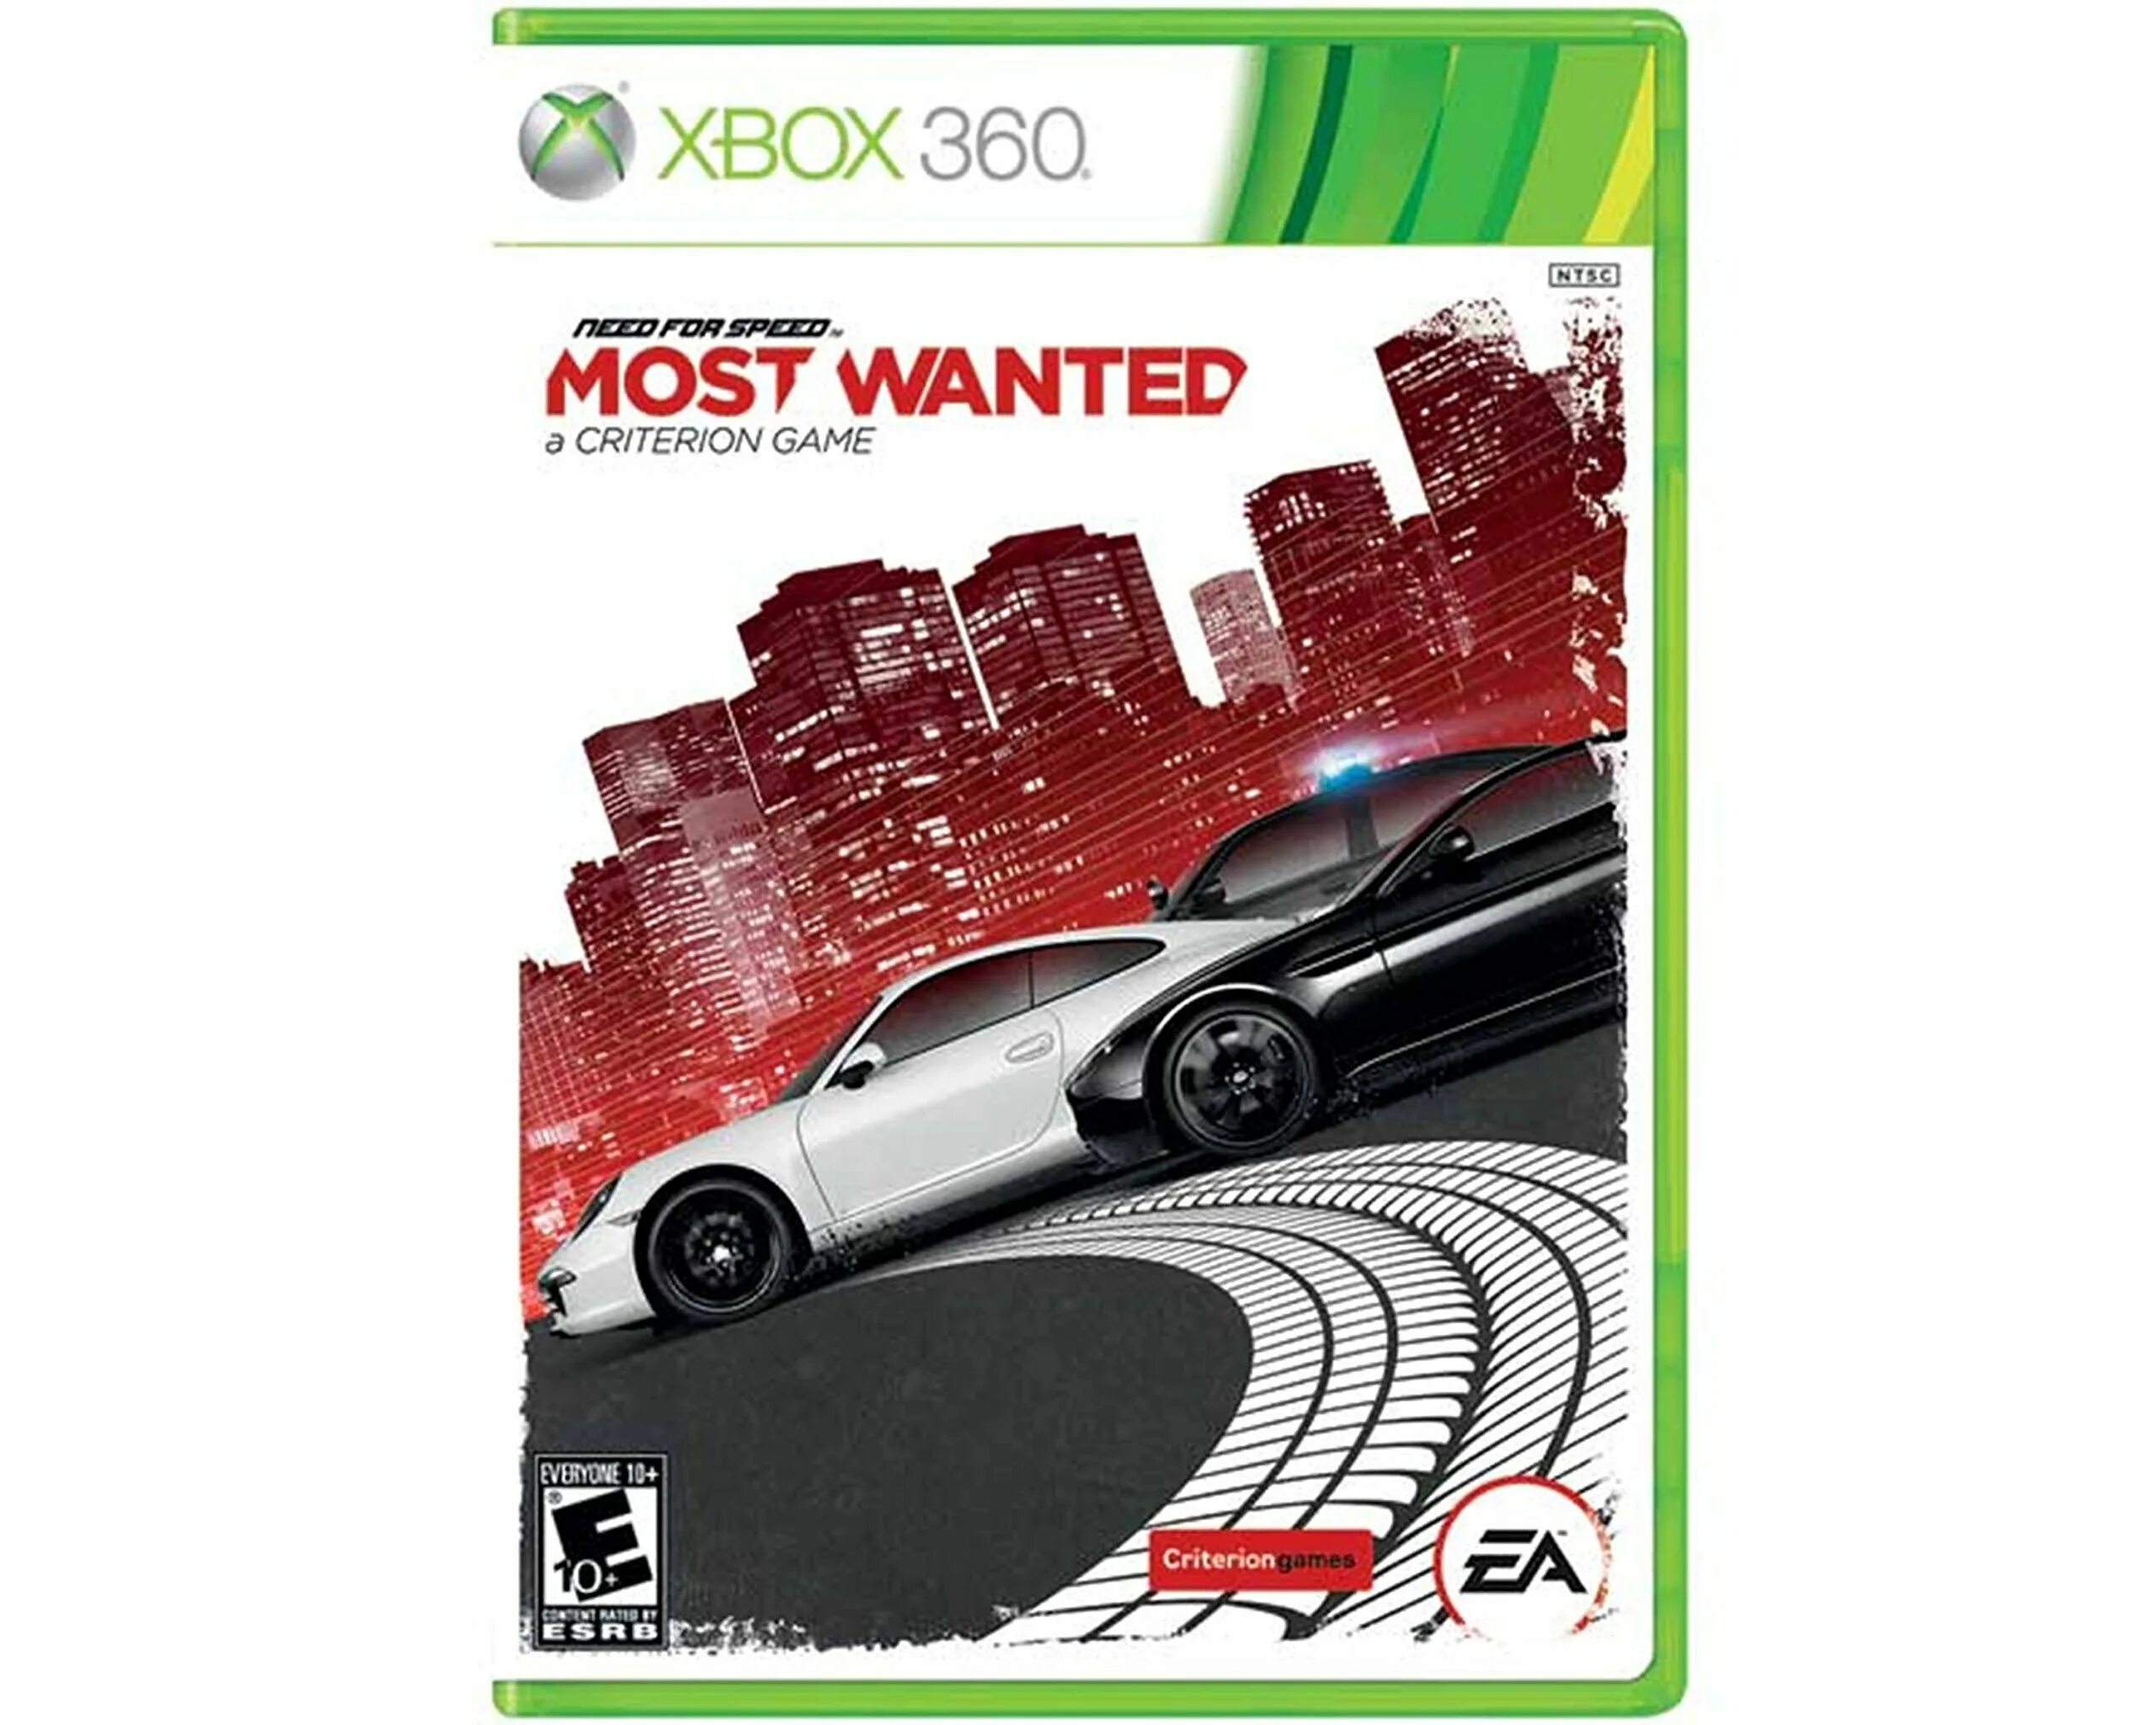 Need for Speed most wanted Xbox 360. Kinect Xbox 360 NFS. Need for Speed most wanted Criterion. Need for Speed most wanted для хбокс. Nfs most wanted xbox